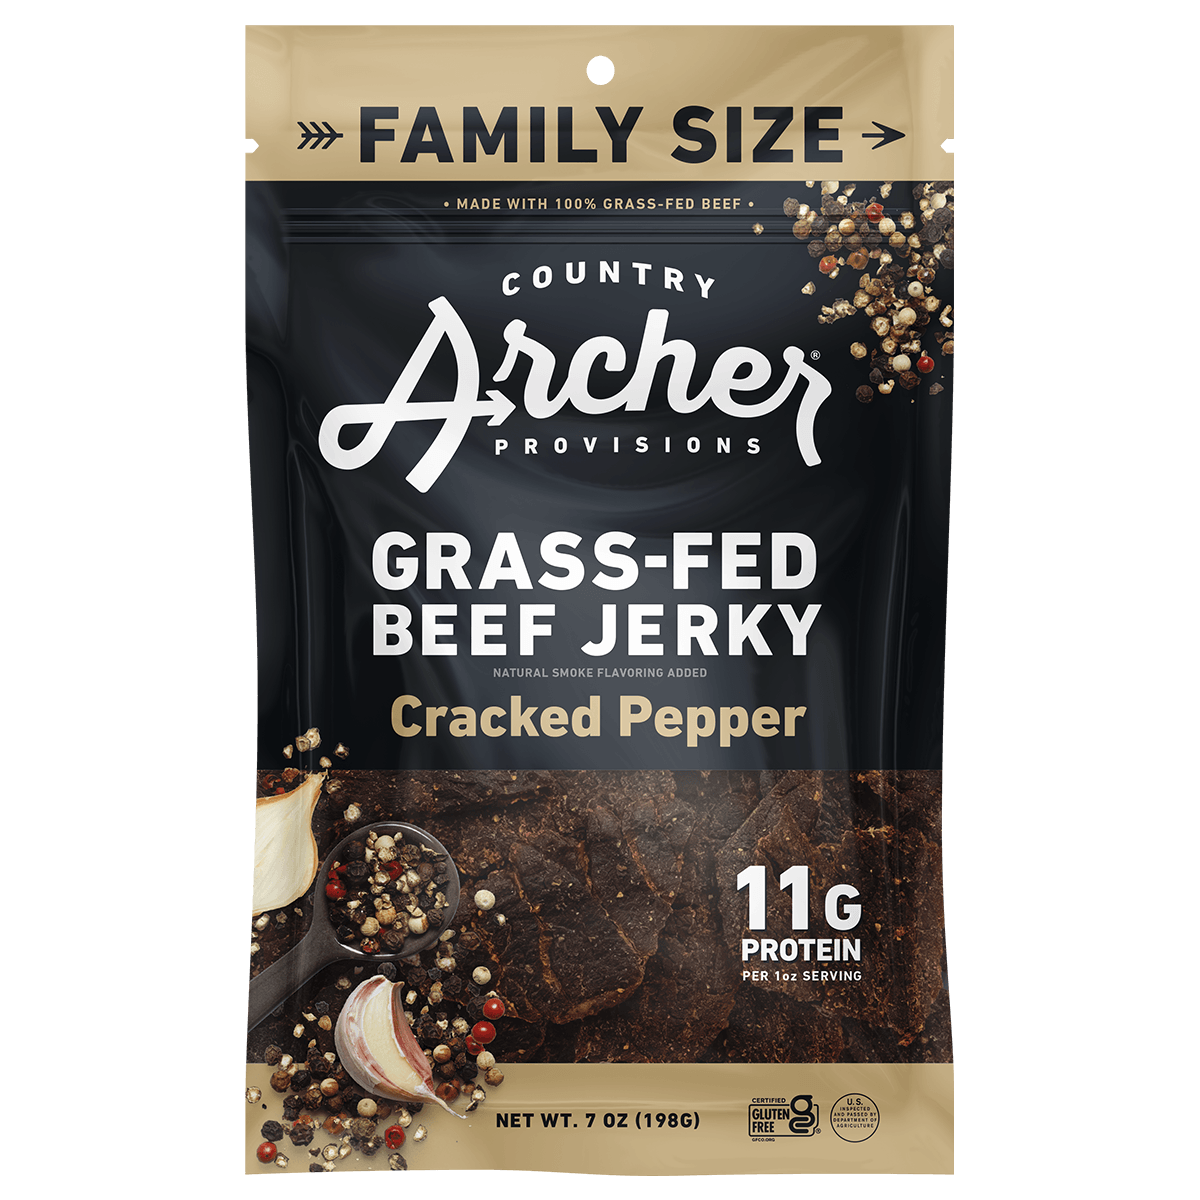  Cracked Pepper Beef Jerky by Country Archer, 8-Pack (8 x 7oz bags), Beef - Beef Jerky - Gluten-Free - Grass Fed Beef - High Protein - Jerky - Jerky_Day_Promo - No Preservatives - Organic Ingredients - Original Line, cracked-pepper-beef-jerky, , 8-Pack (8 x 7oz bags)